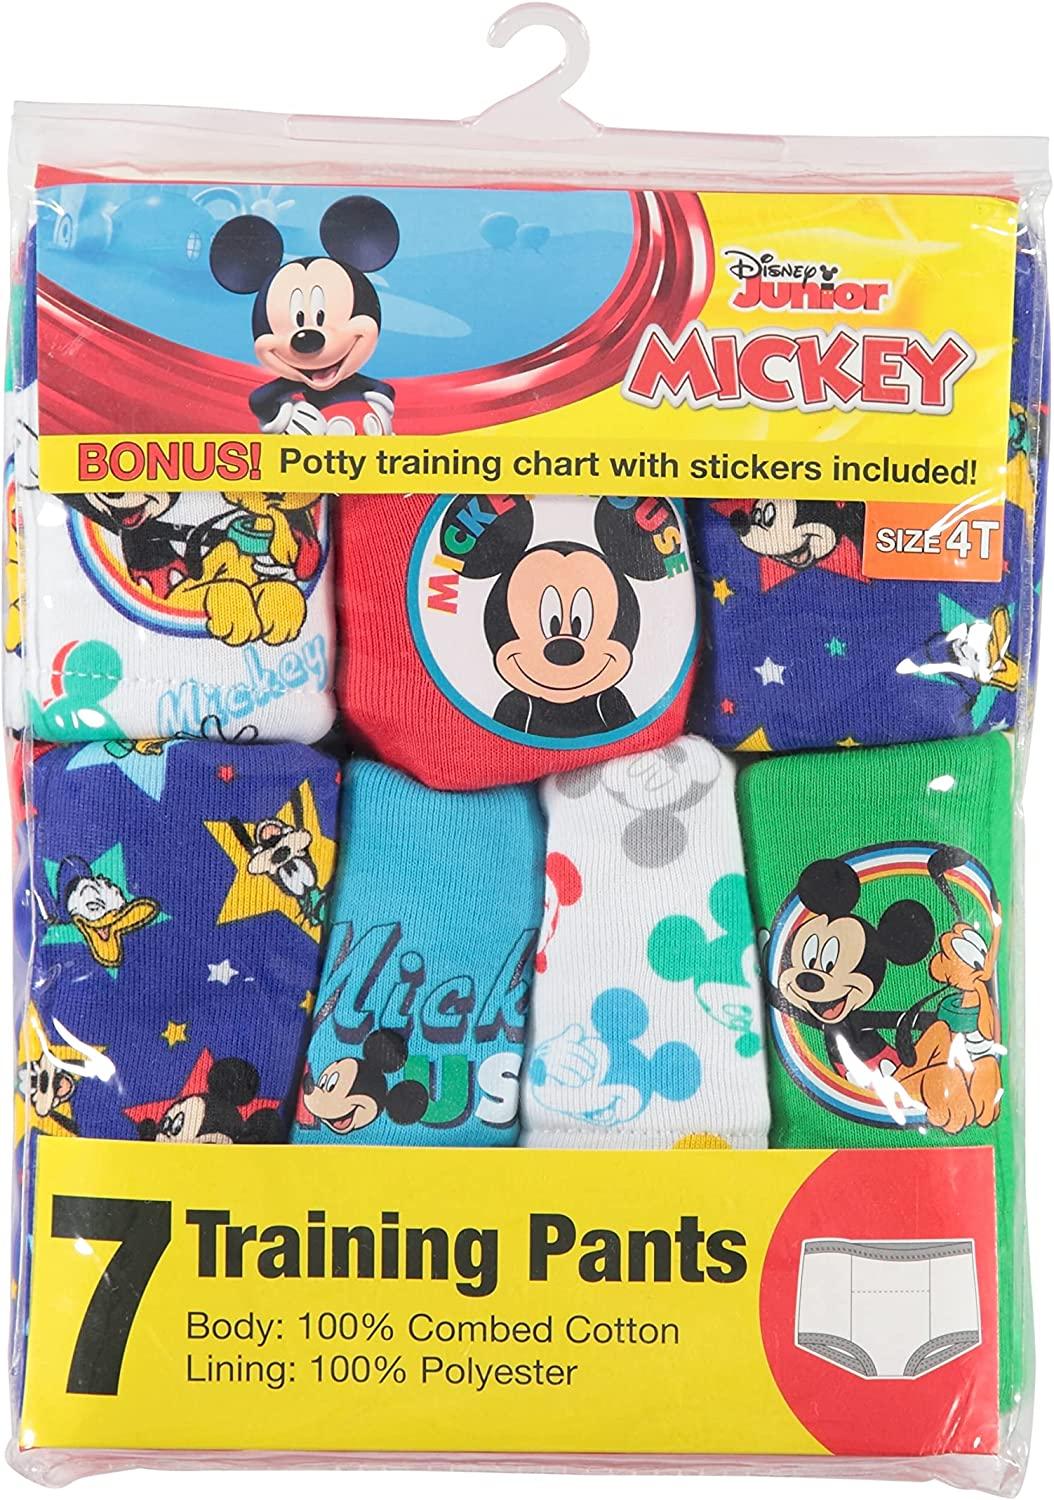 Disney Boys' Toddler Mickey Mouse Potty Training Pants Multipack